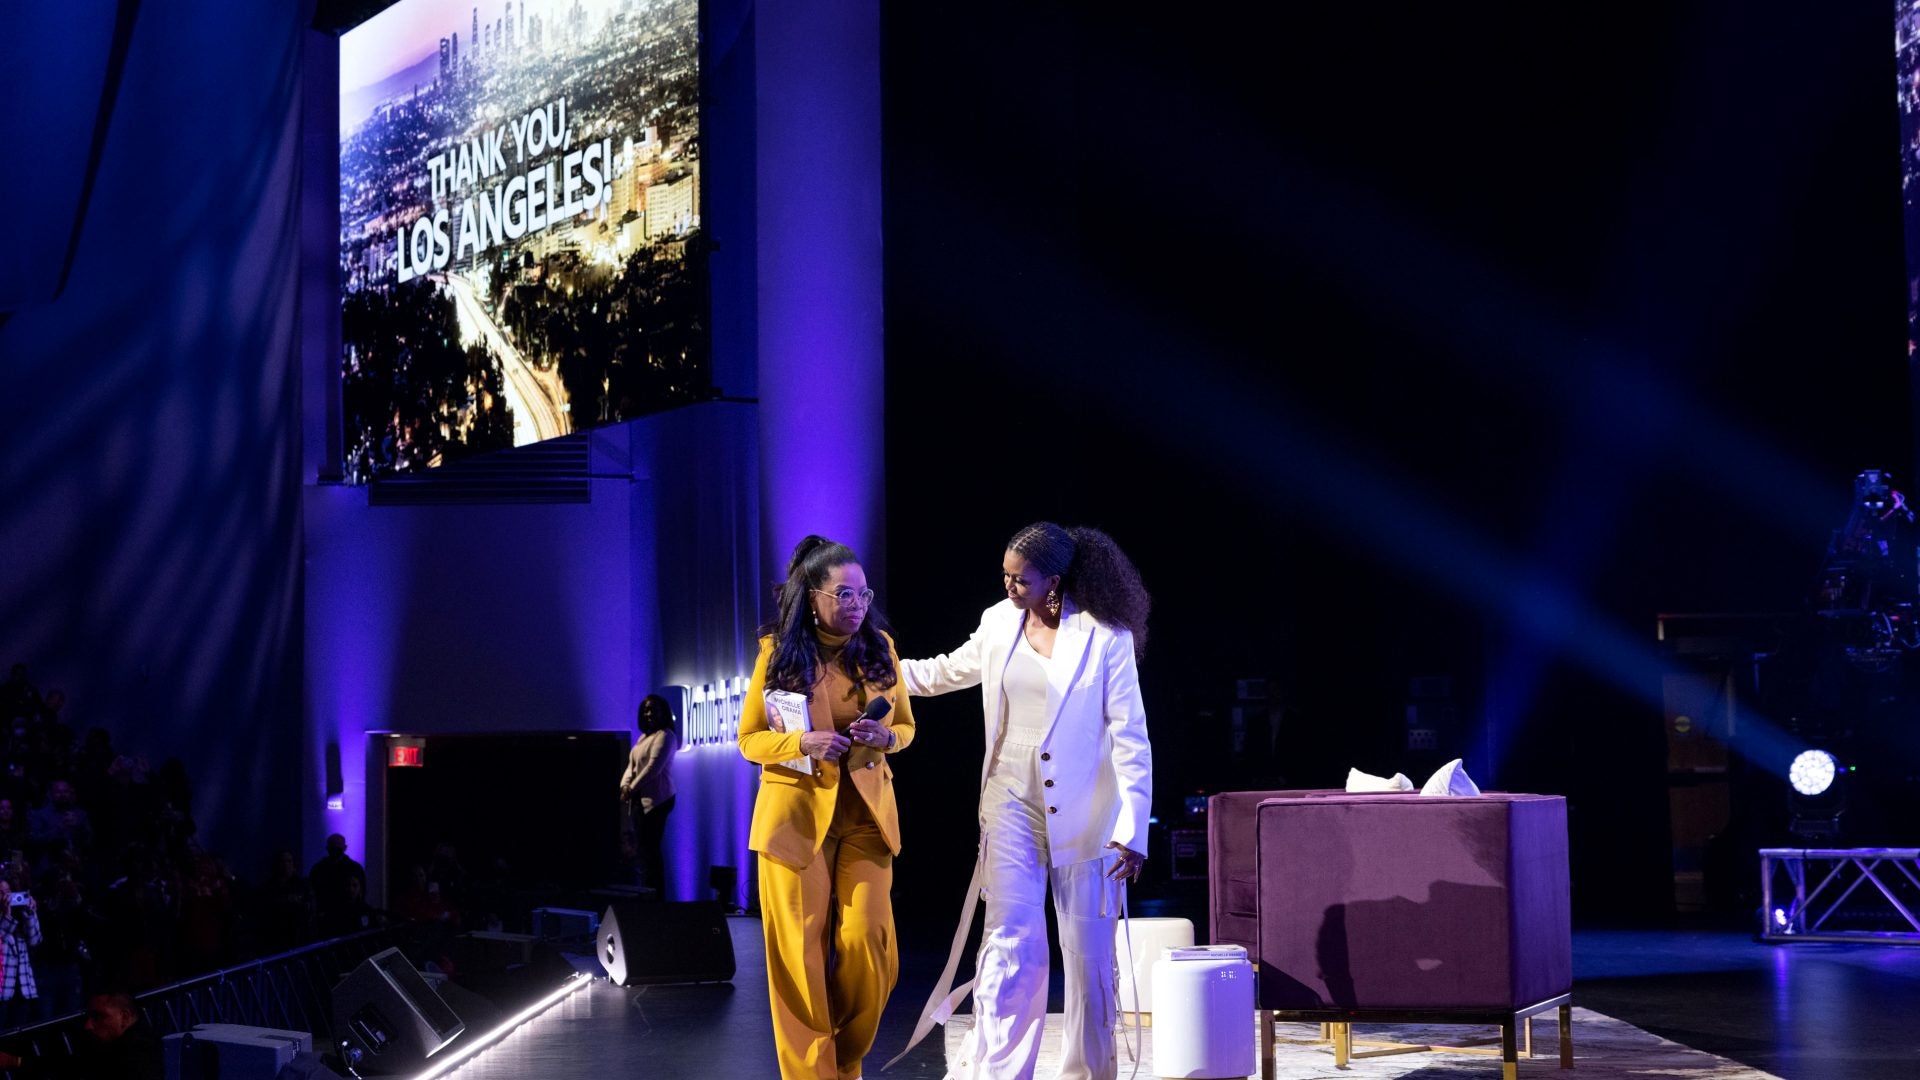 Michelle Obama, Oprah Winfrey Bring 'The Light We Carry' Chat To Netflix